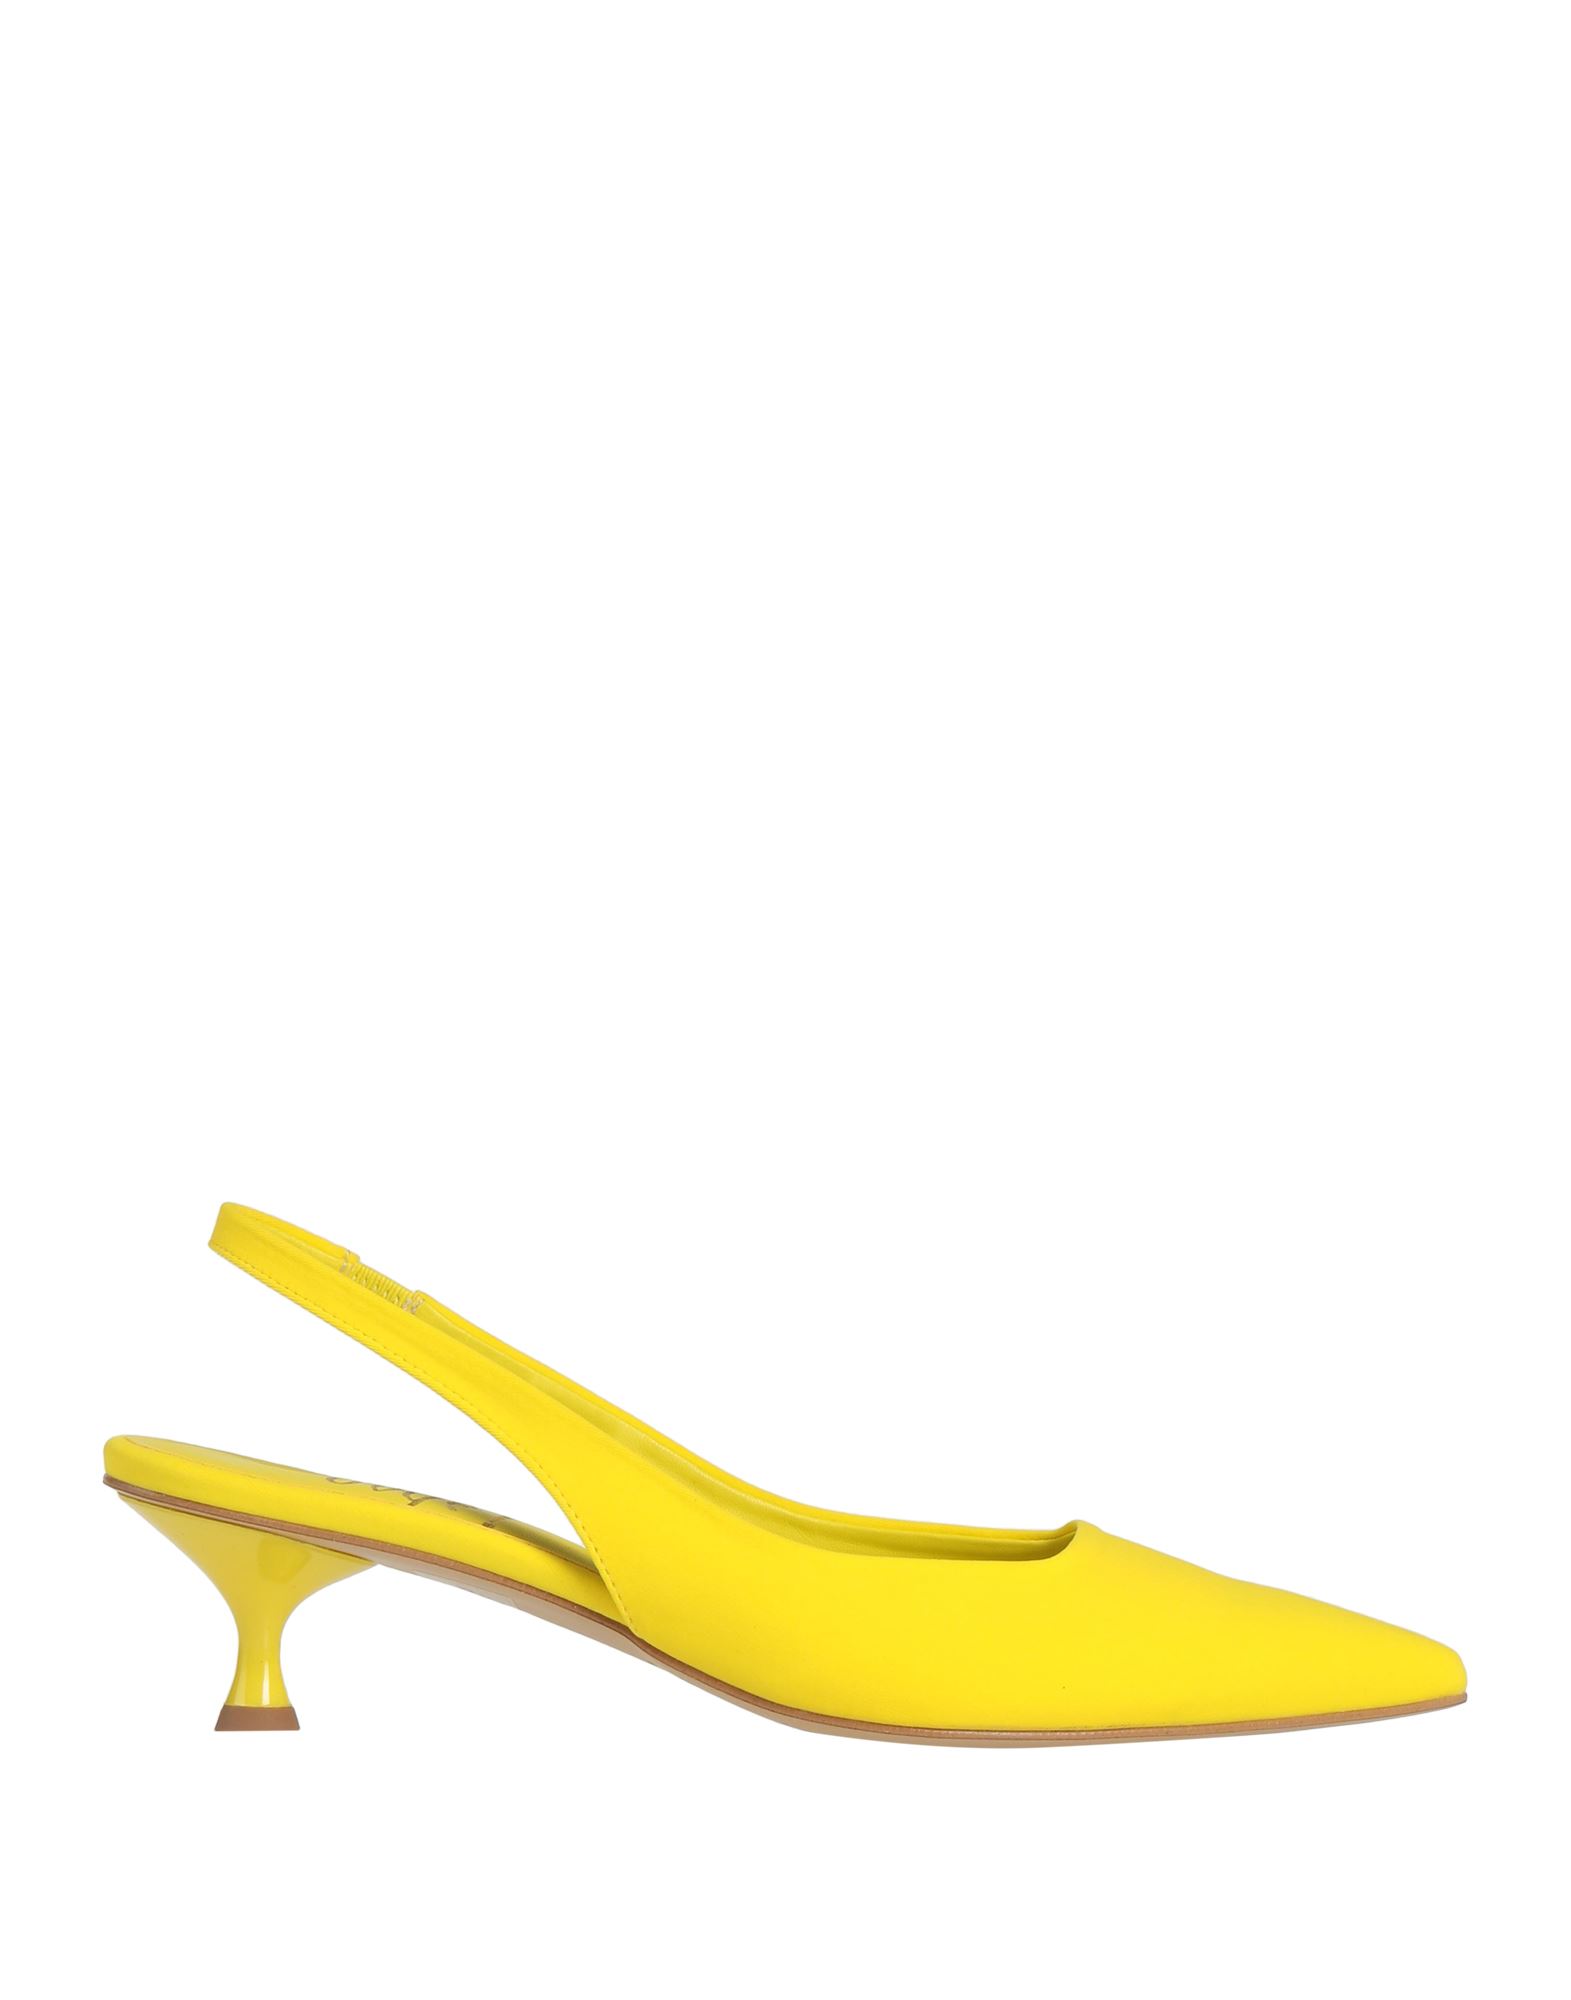 Ovye' By Cristina Lucchi Pumps In Yellow